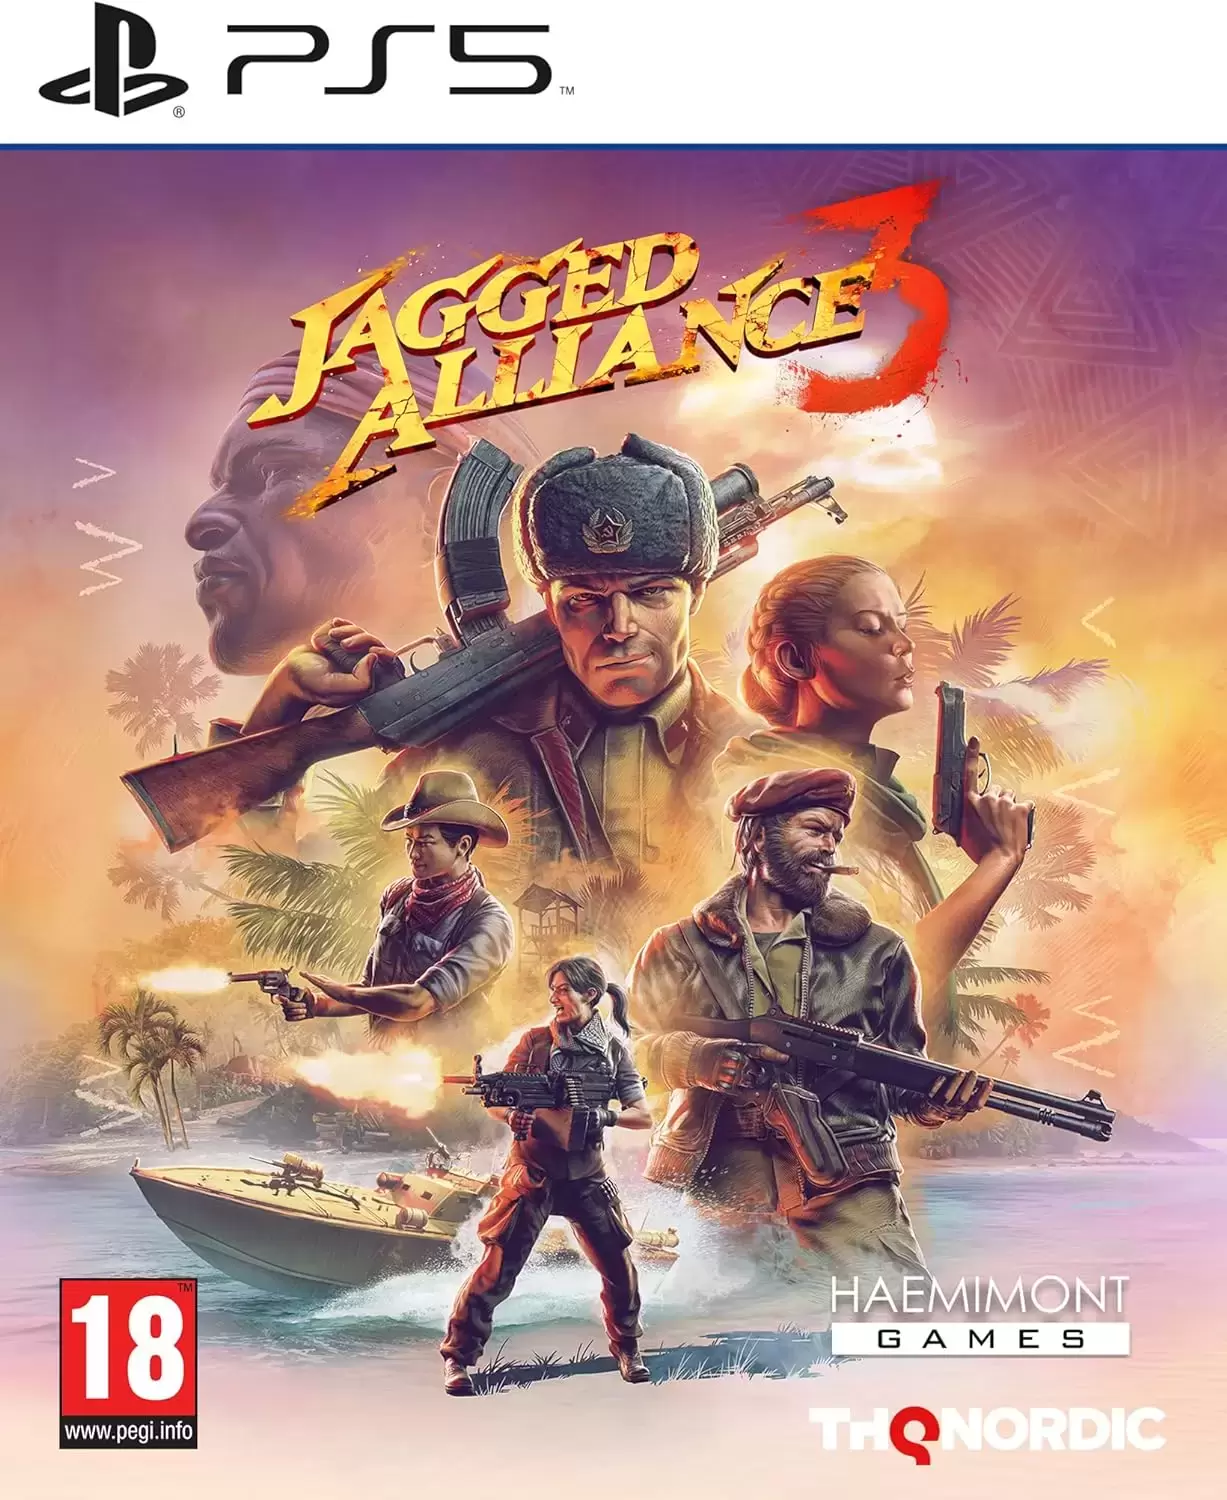 PS5 Games - Jagged Alliance 3